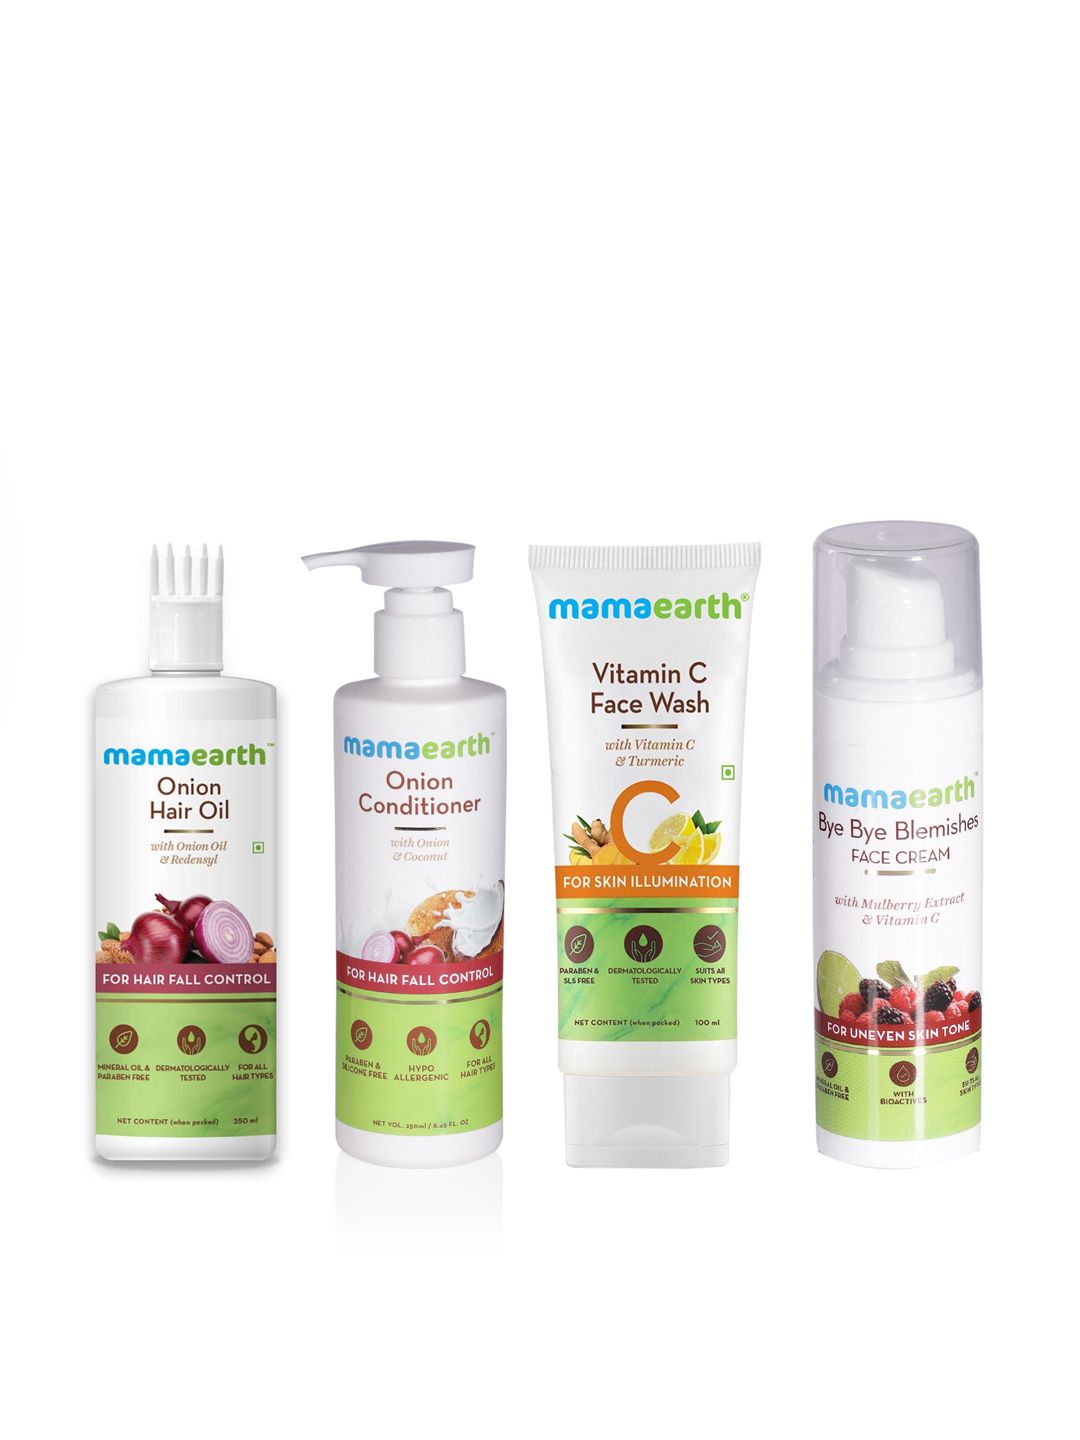 Mamaearth Unisex Set of Hair Oil, Conditioner, Face Wash & Face Cream Price in India